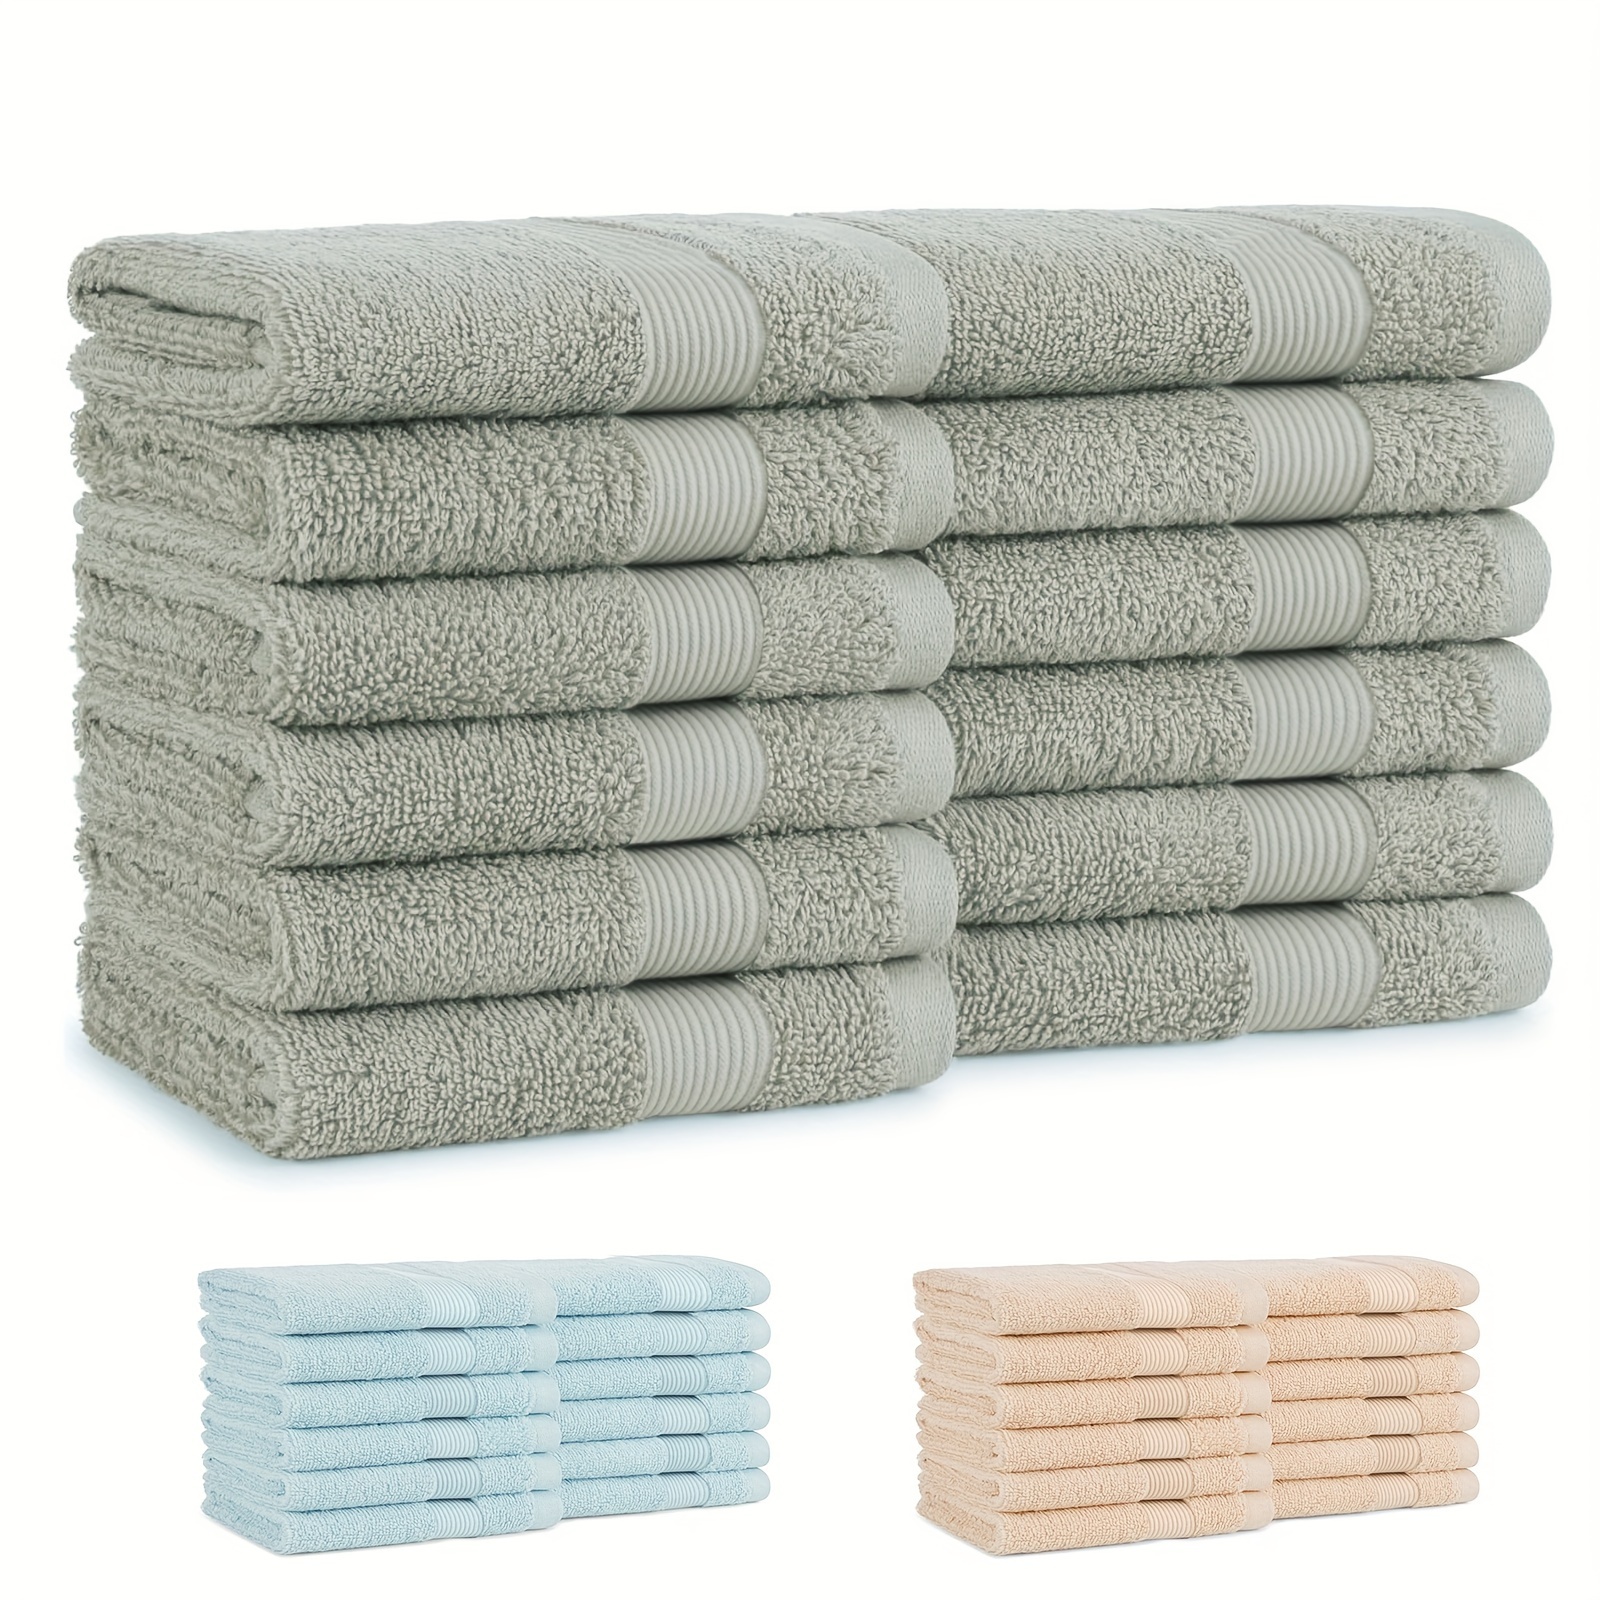 

12pcs Cotton Hand Towel, Absorbent & Quick-drying Showering Towel, Super Soft & Skin-friendly Bathing Towel, For Home Bathroom, Ideal Bathroom Supplies